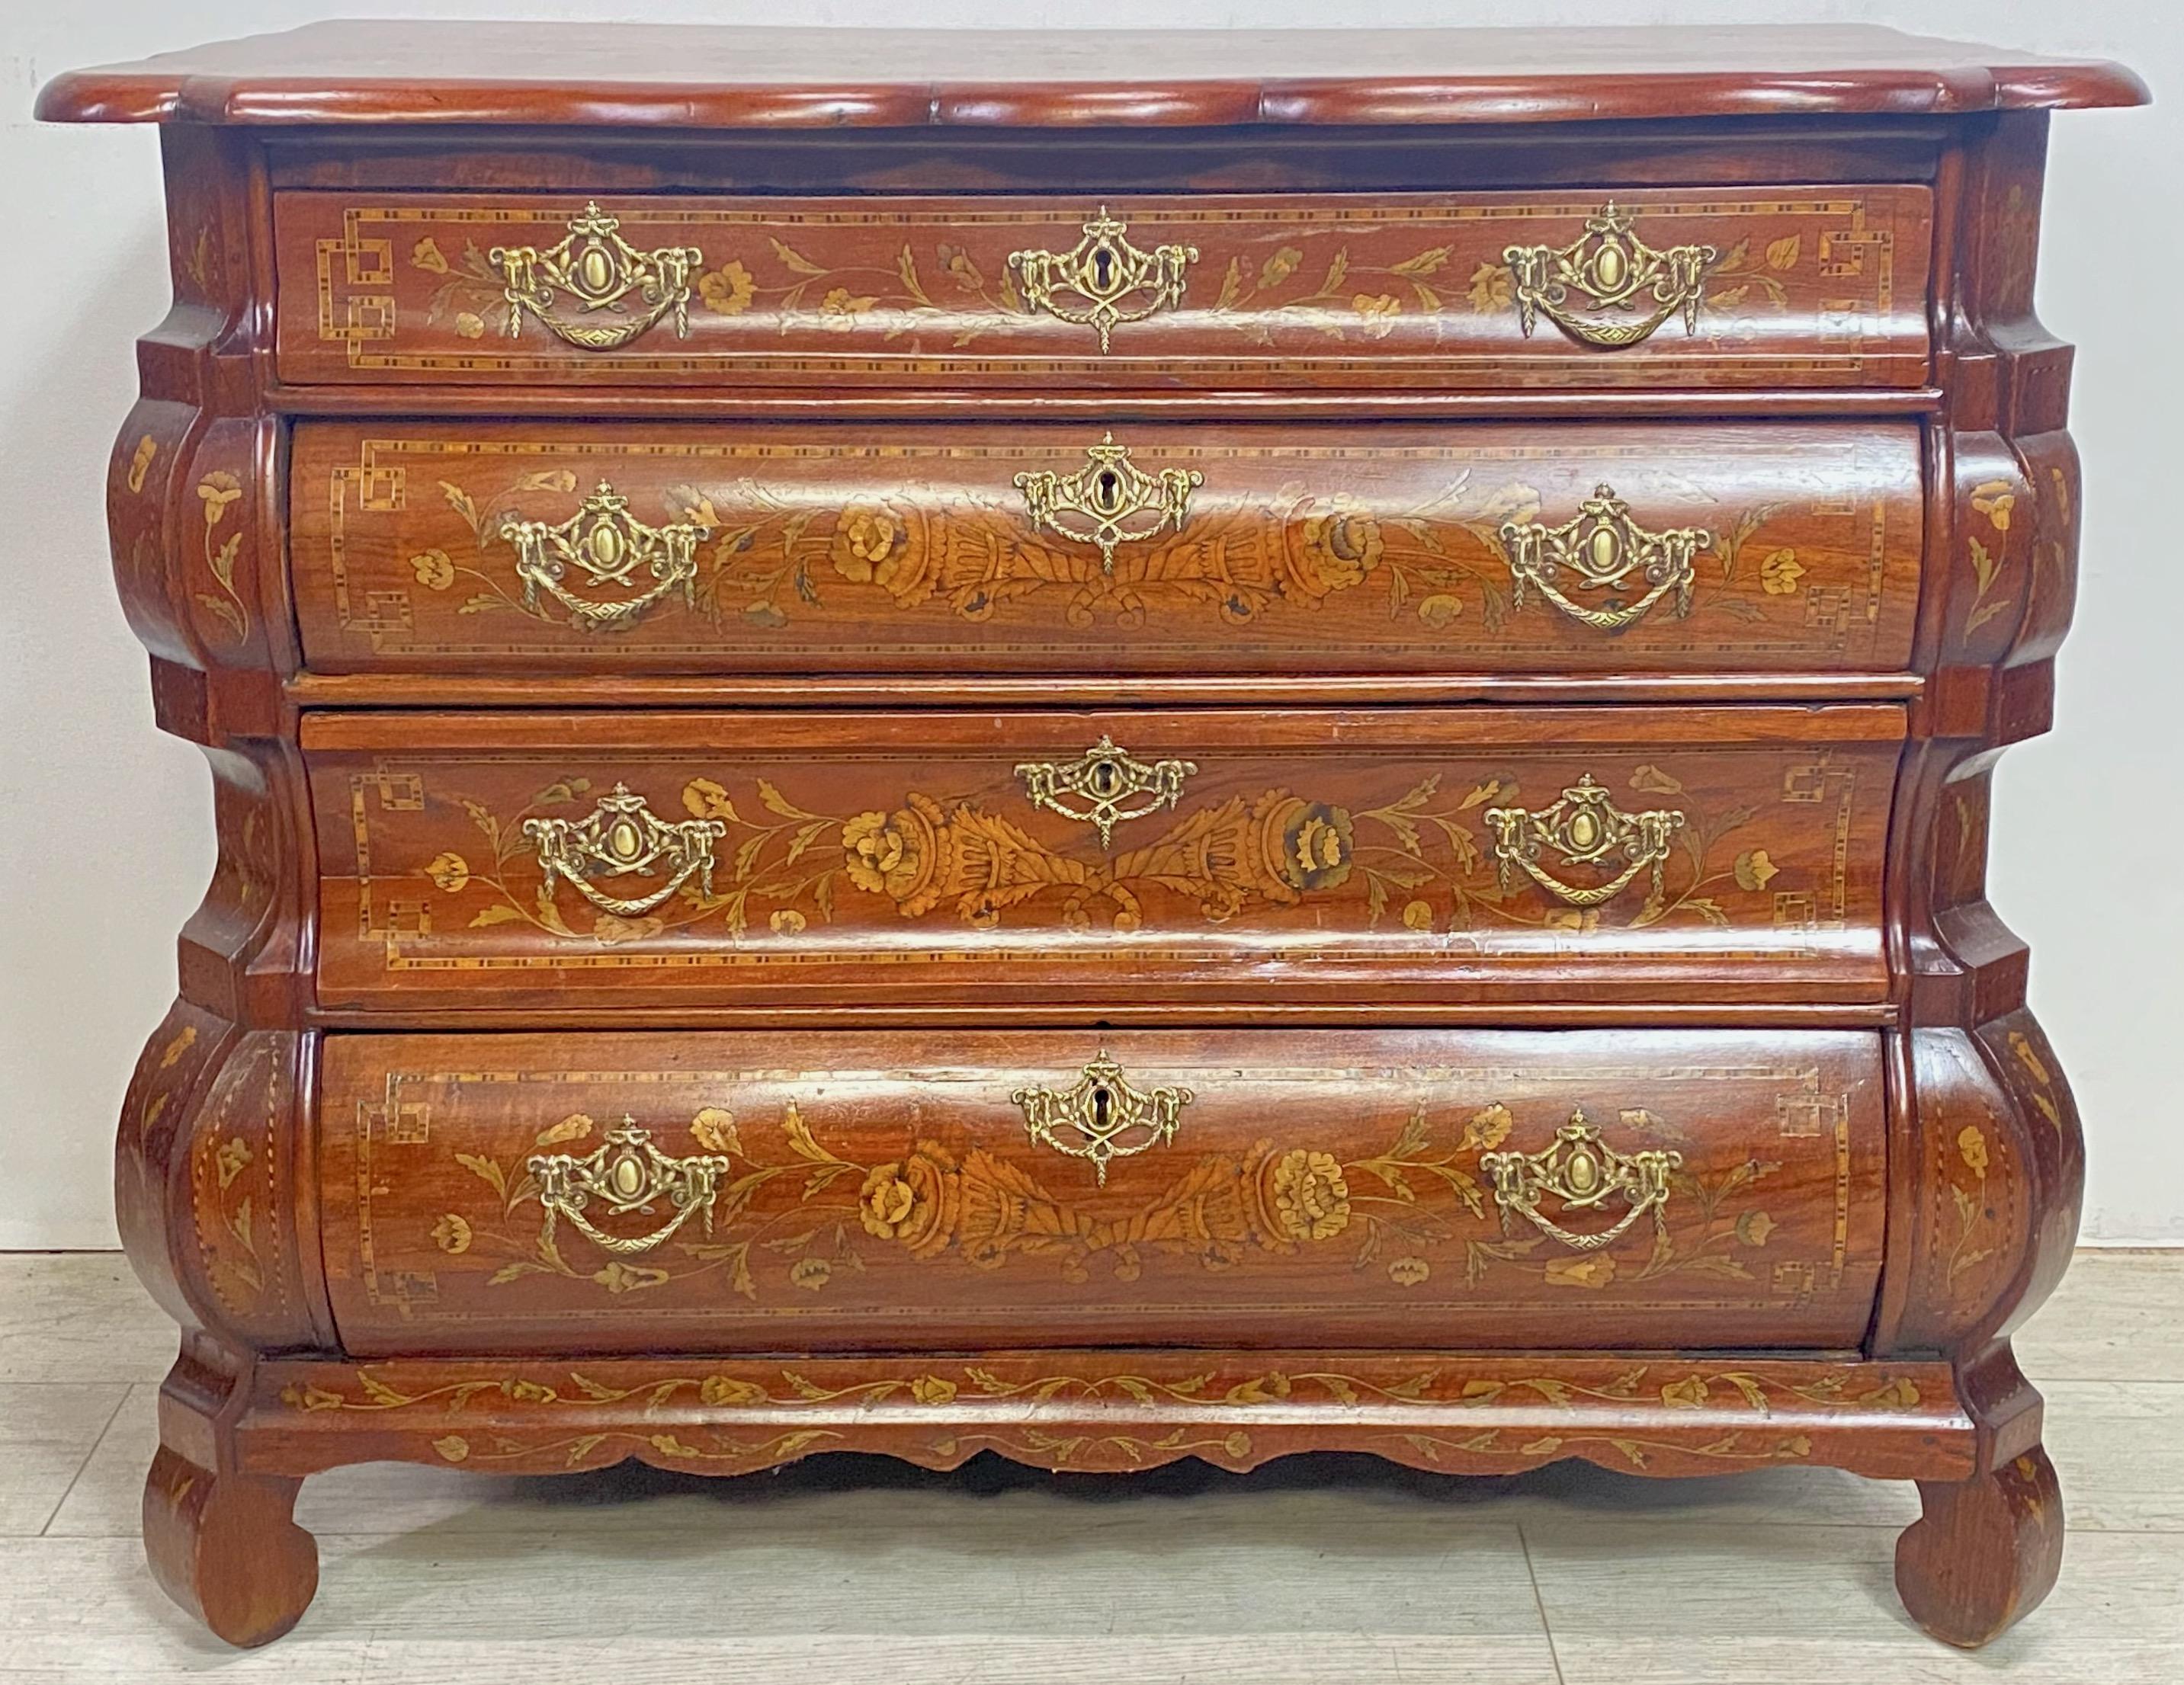 Walnut Bombe Style Chest with Satinwood and Fruit Wood Inlay, 18th Century Dutch In Good Condition For Sale In San Francisco, CA